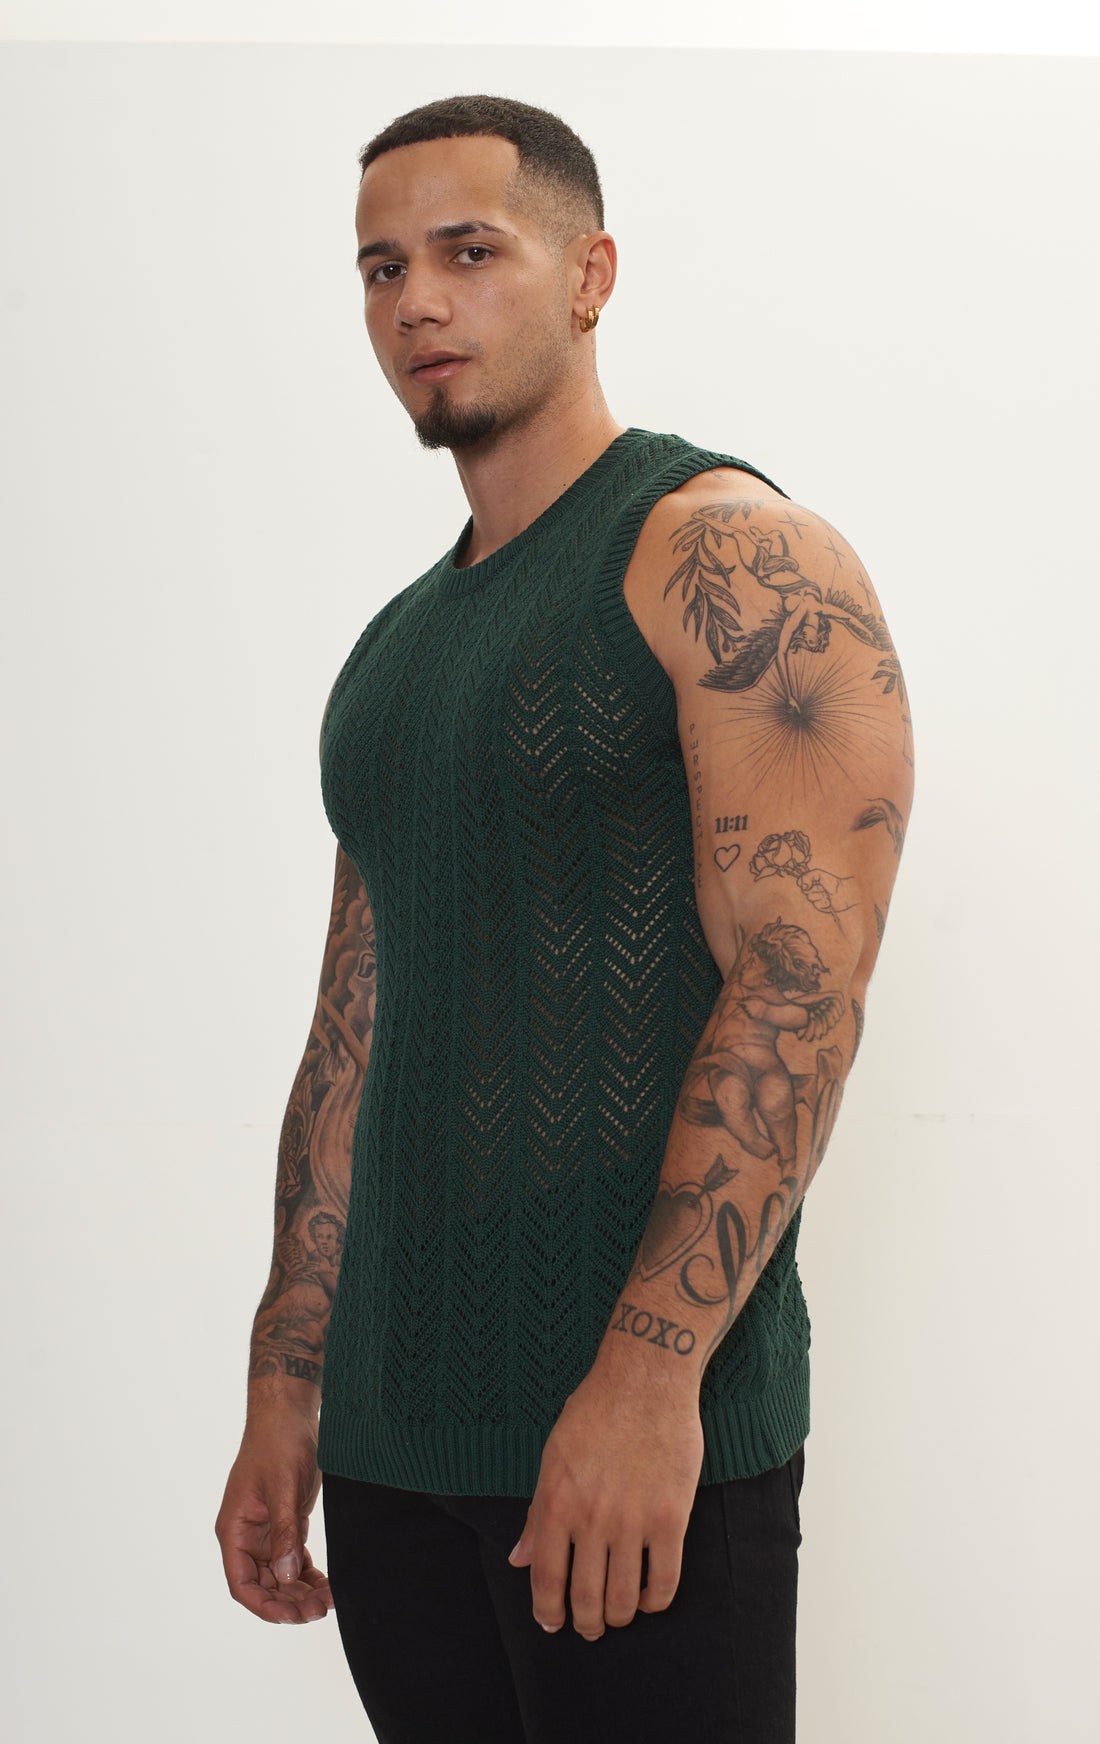 Muscle Fit Tank Top - Green